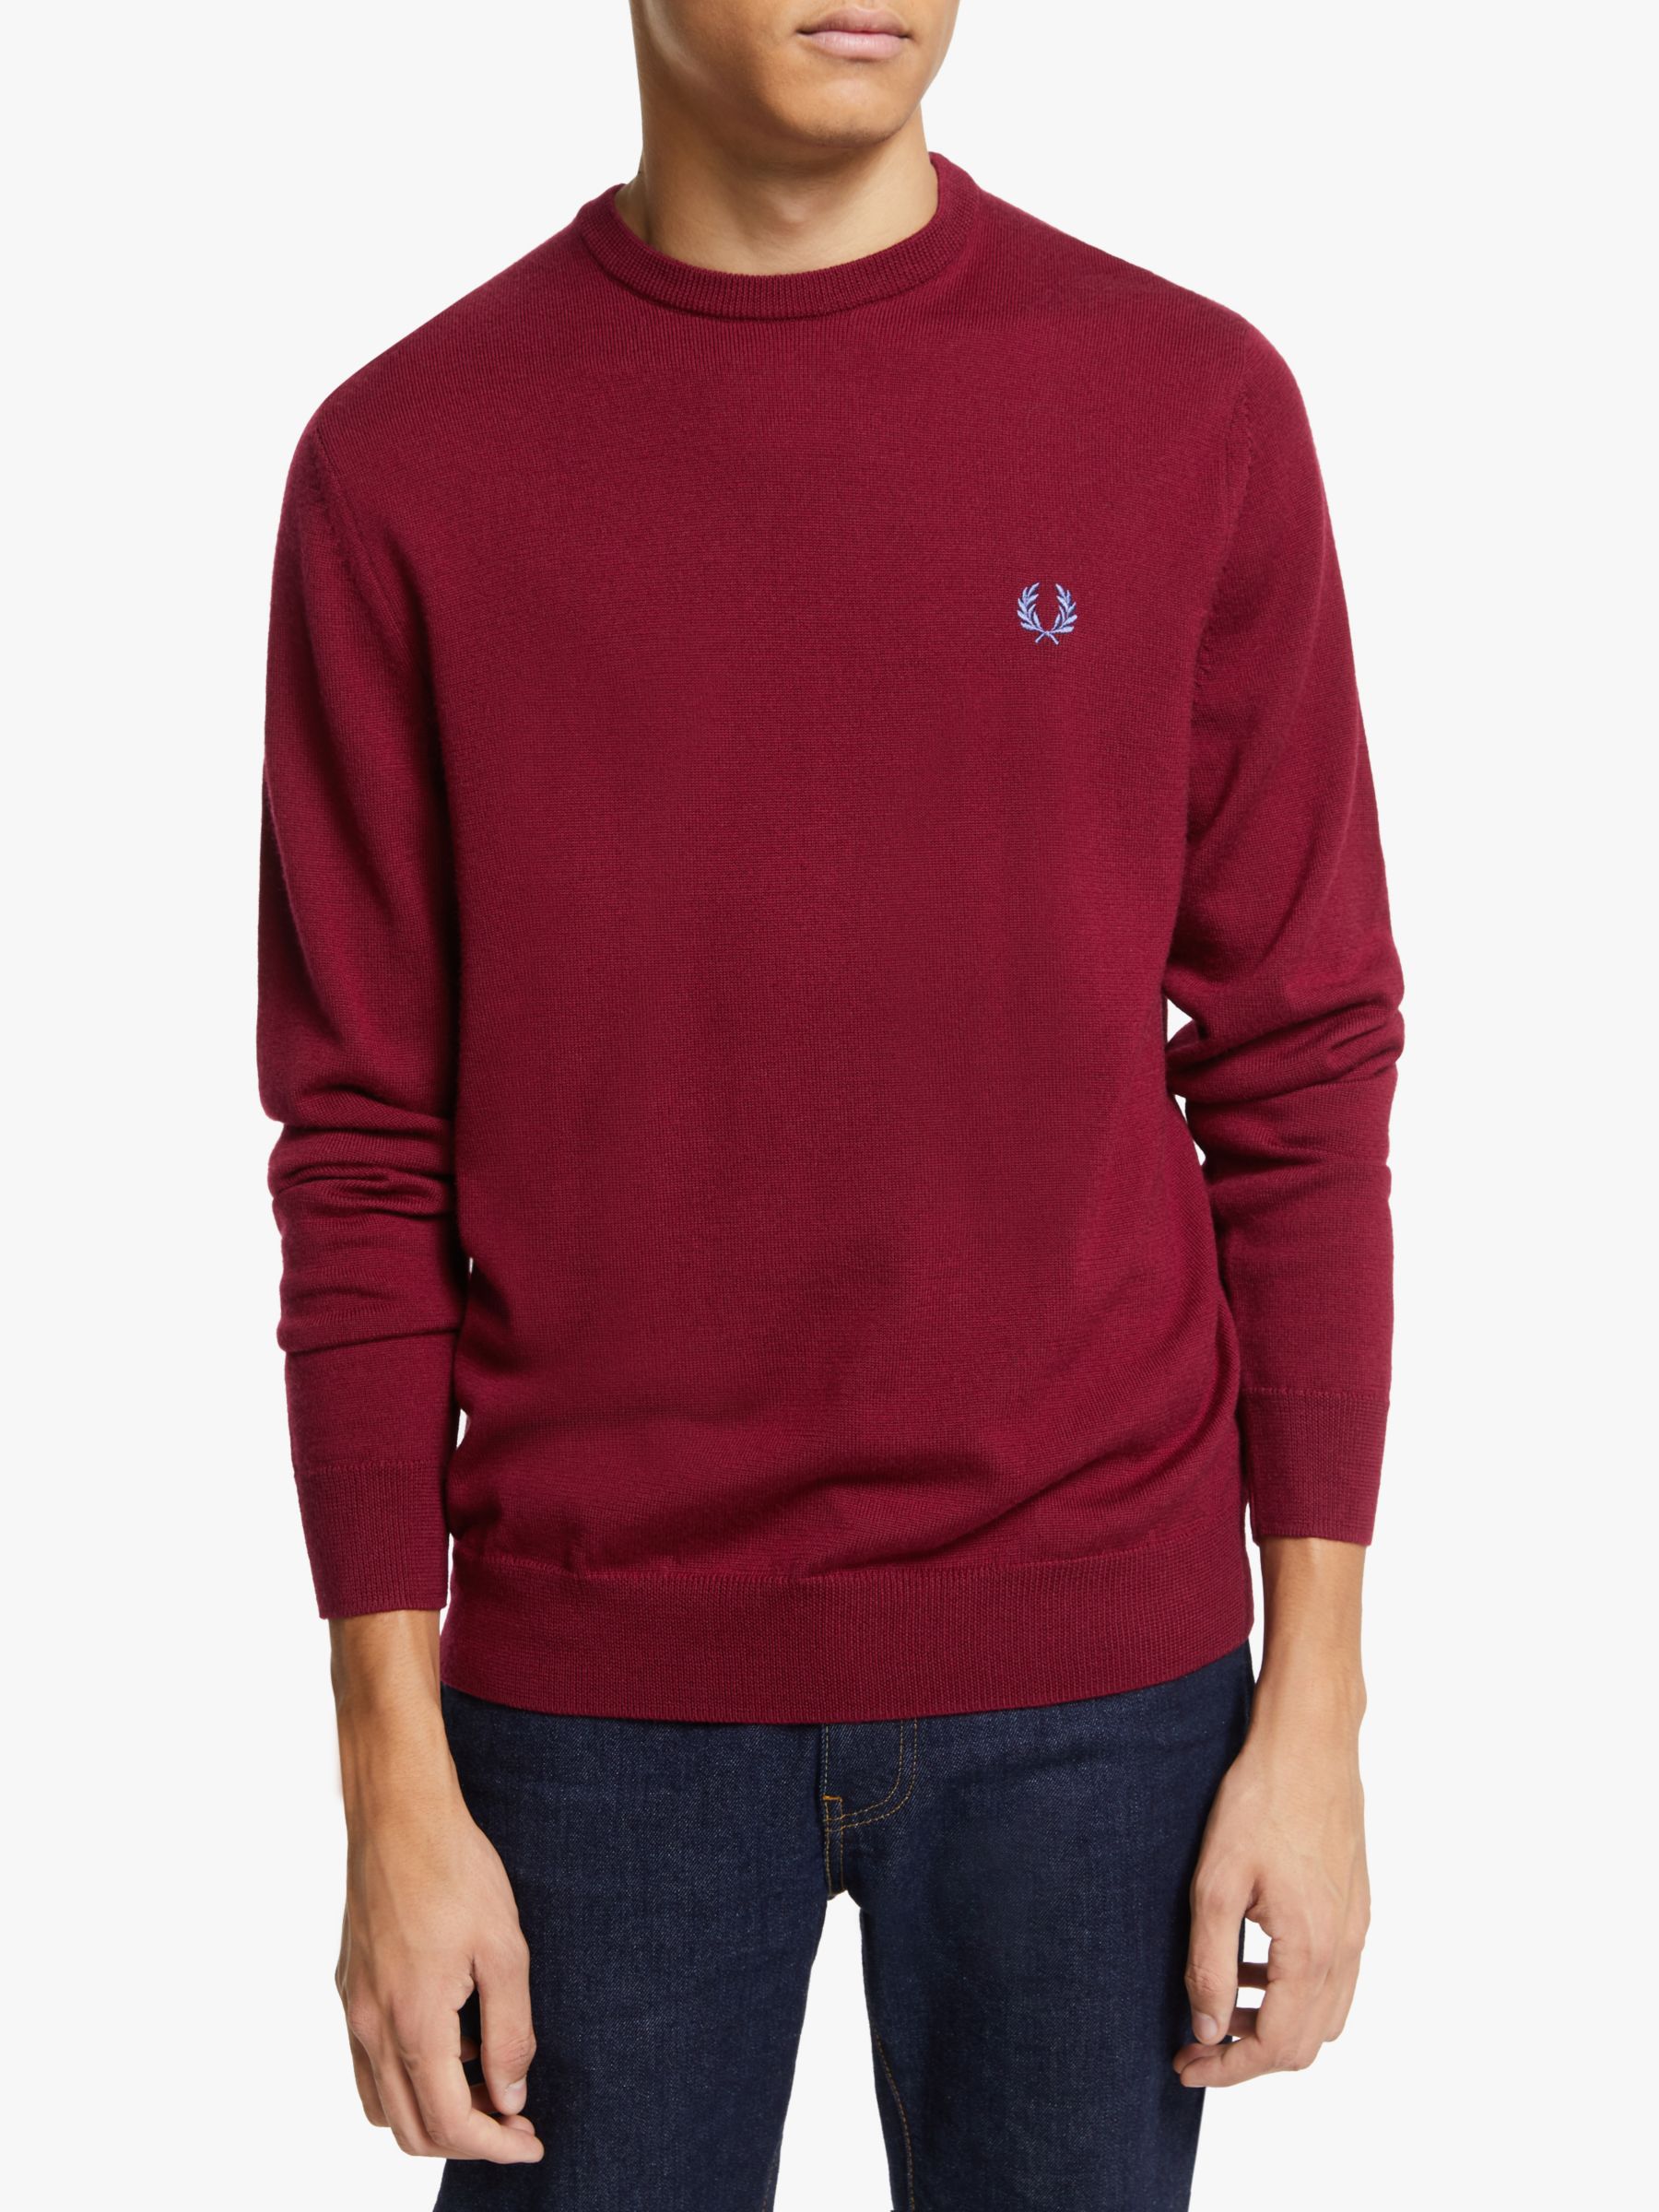 Fred Perry Classic Merino Crew Neck Jumper at John Lewis & Partners